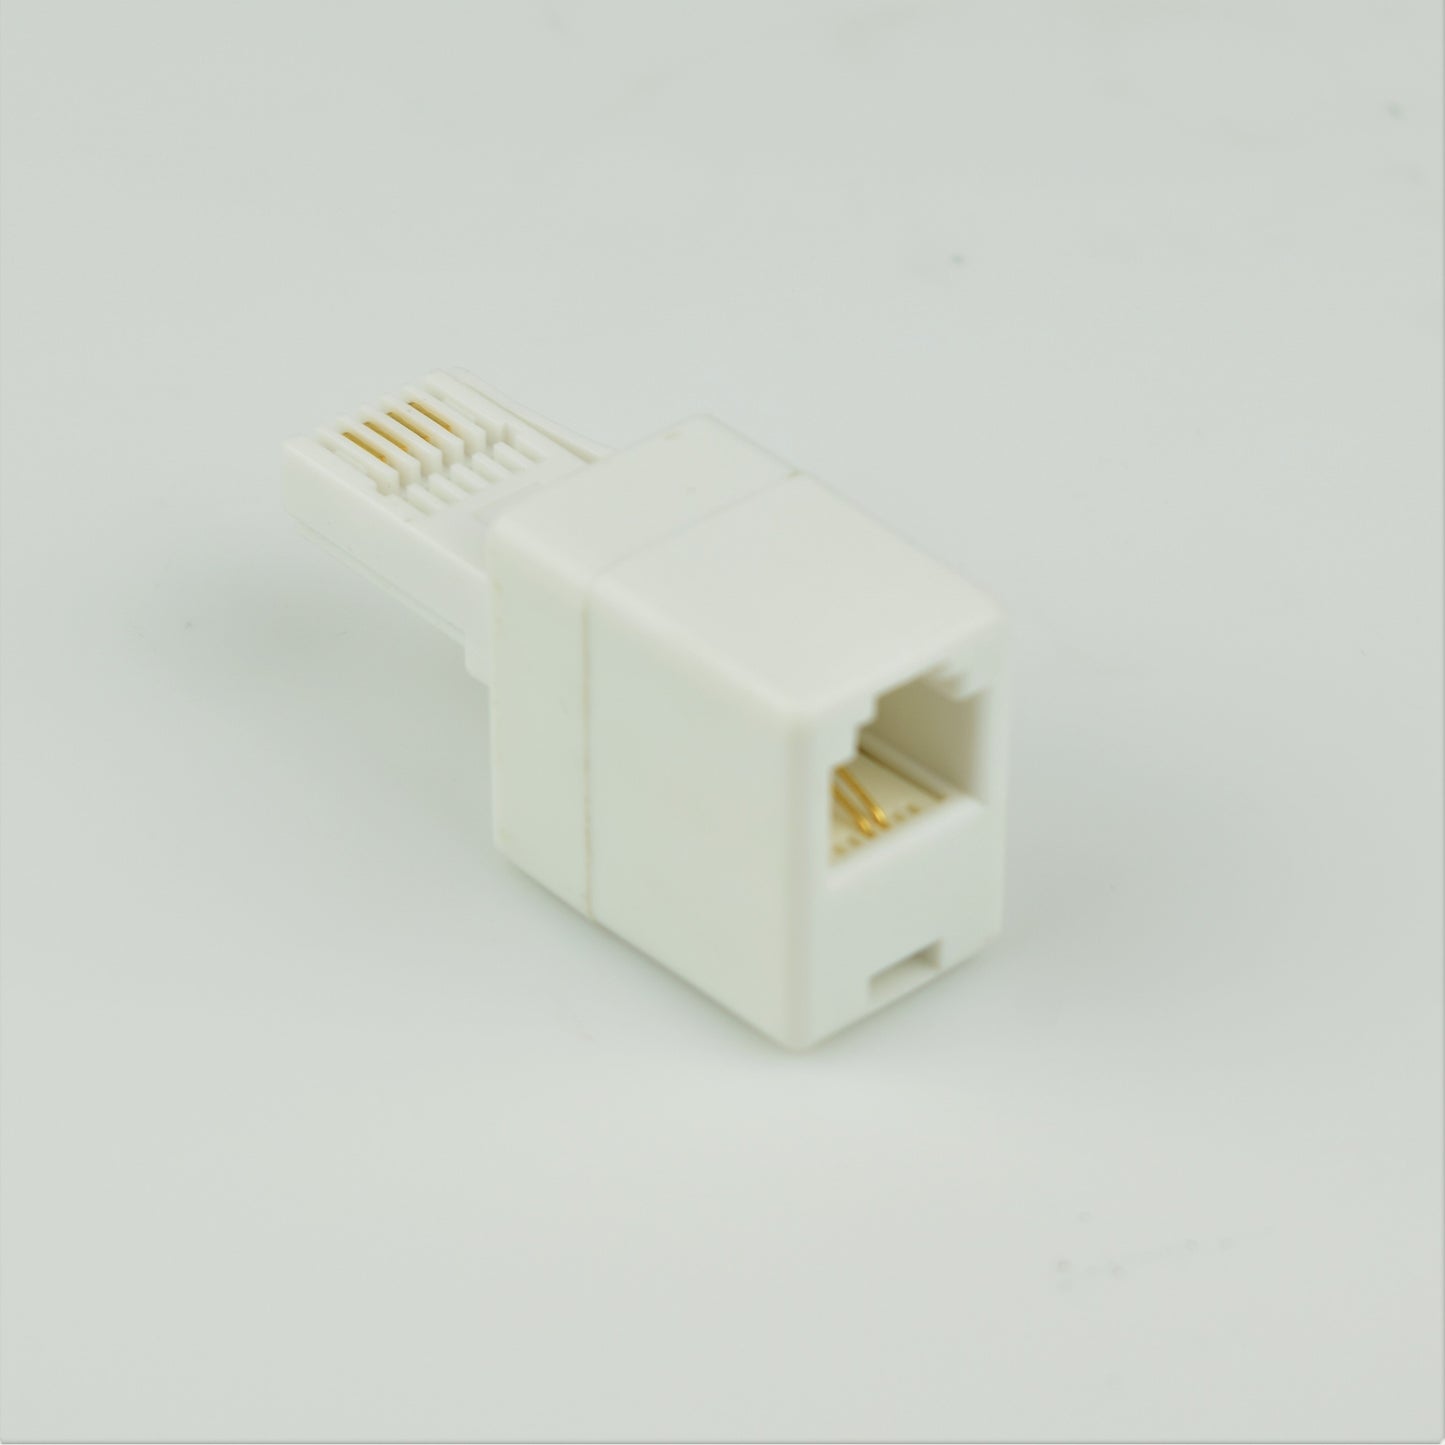 RJ-11 to BT Adapter